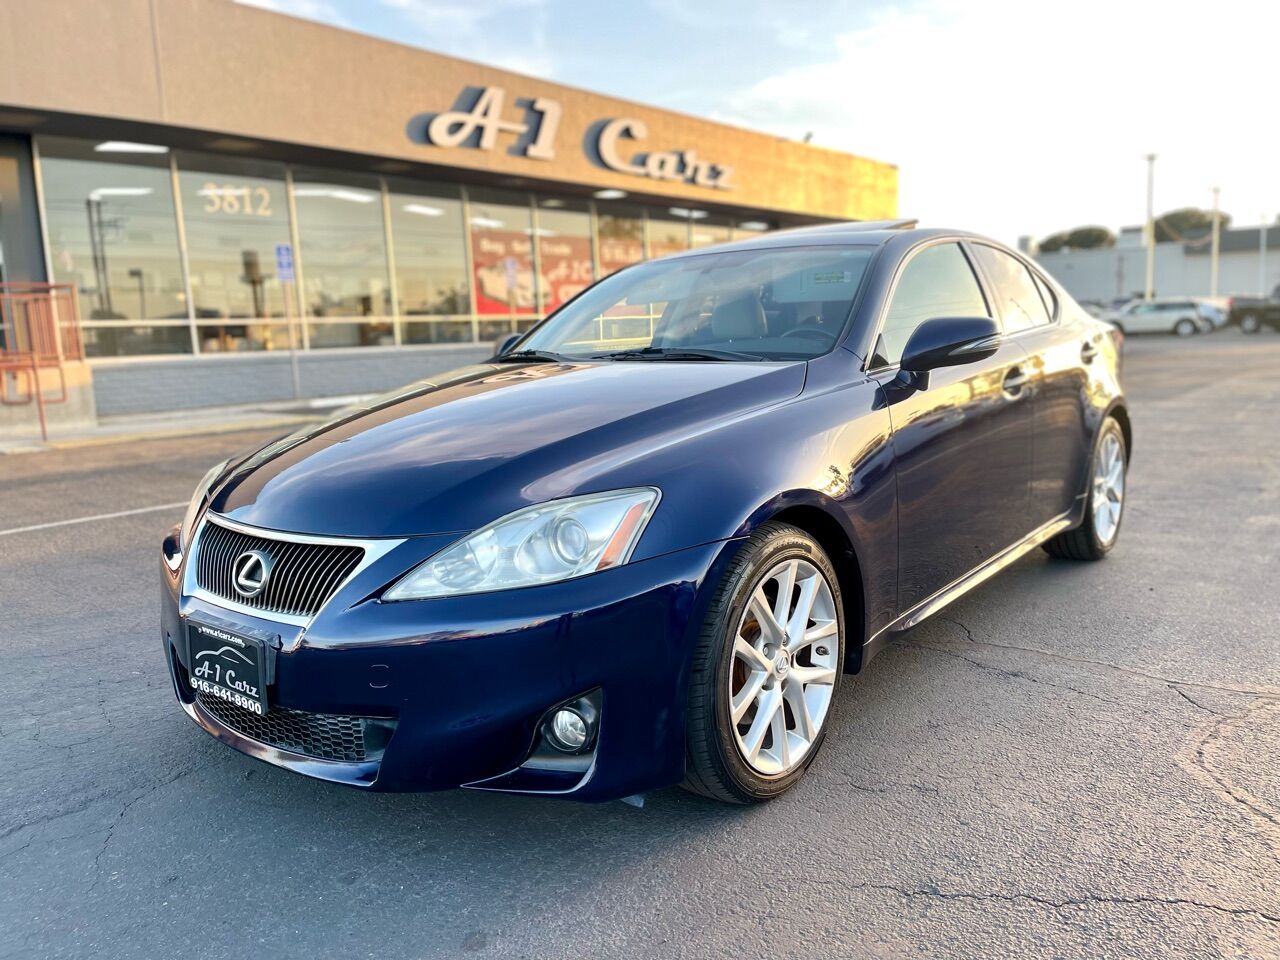 Lexus IS 250 For Sale In California - Carsforsale.com®